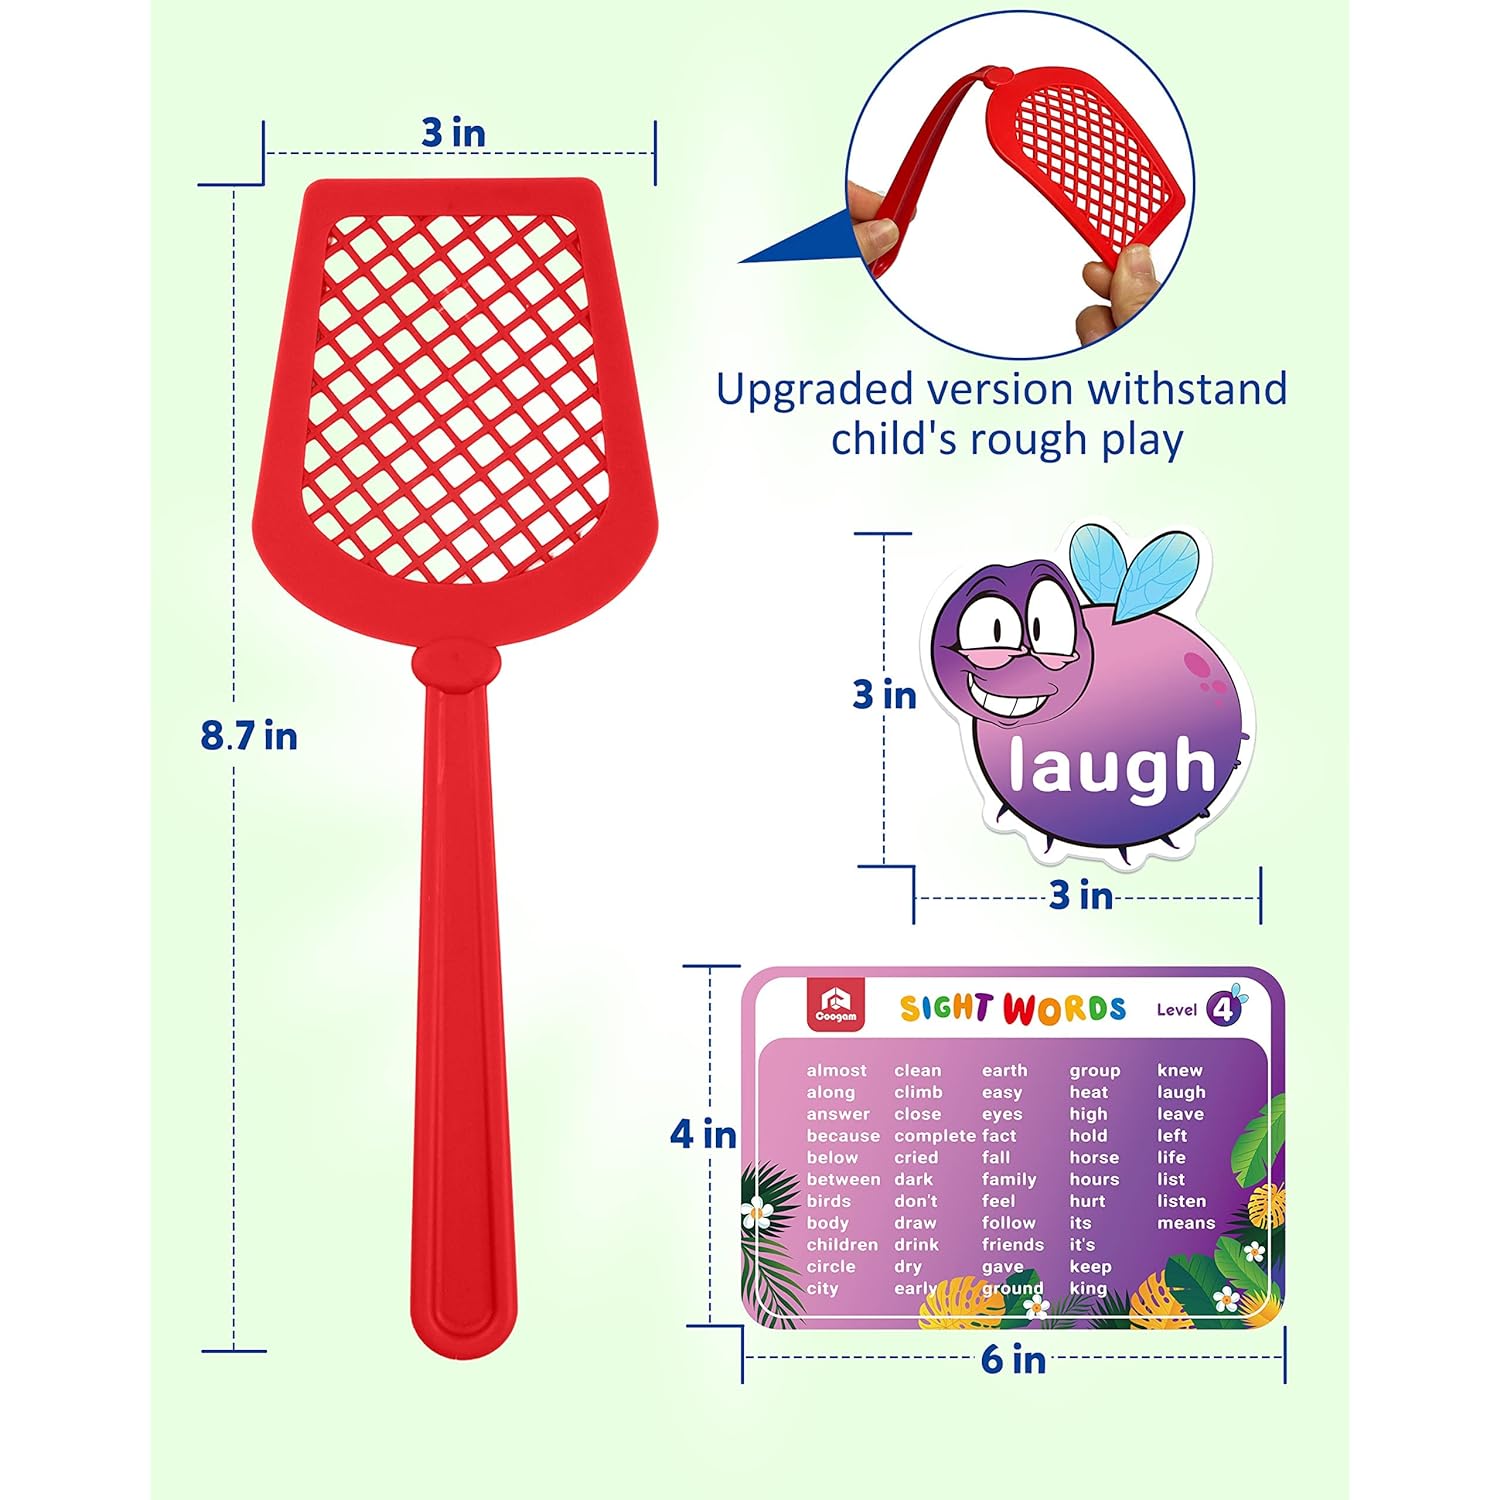 Great Choice Products Sight Words Game With 400 Fry Sight Words And 4 Fly Swatters Set, Dolch Word List Phonics, Literacy Learning Reading Fla…